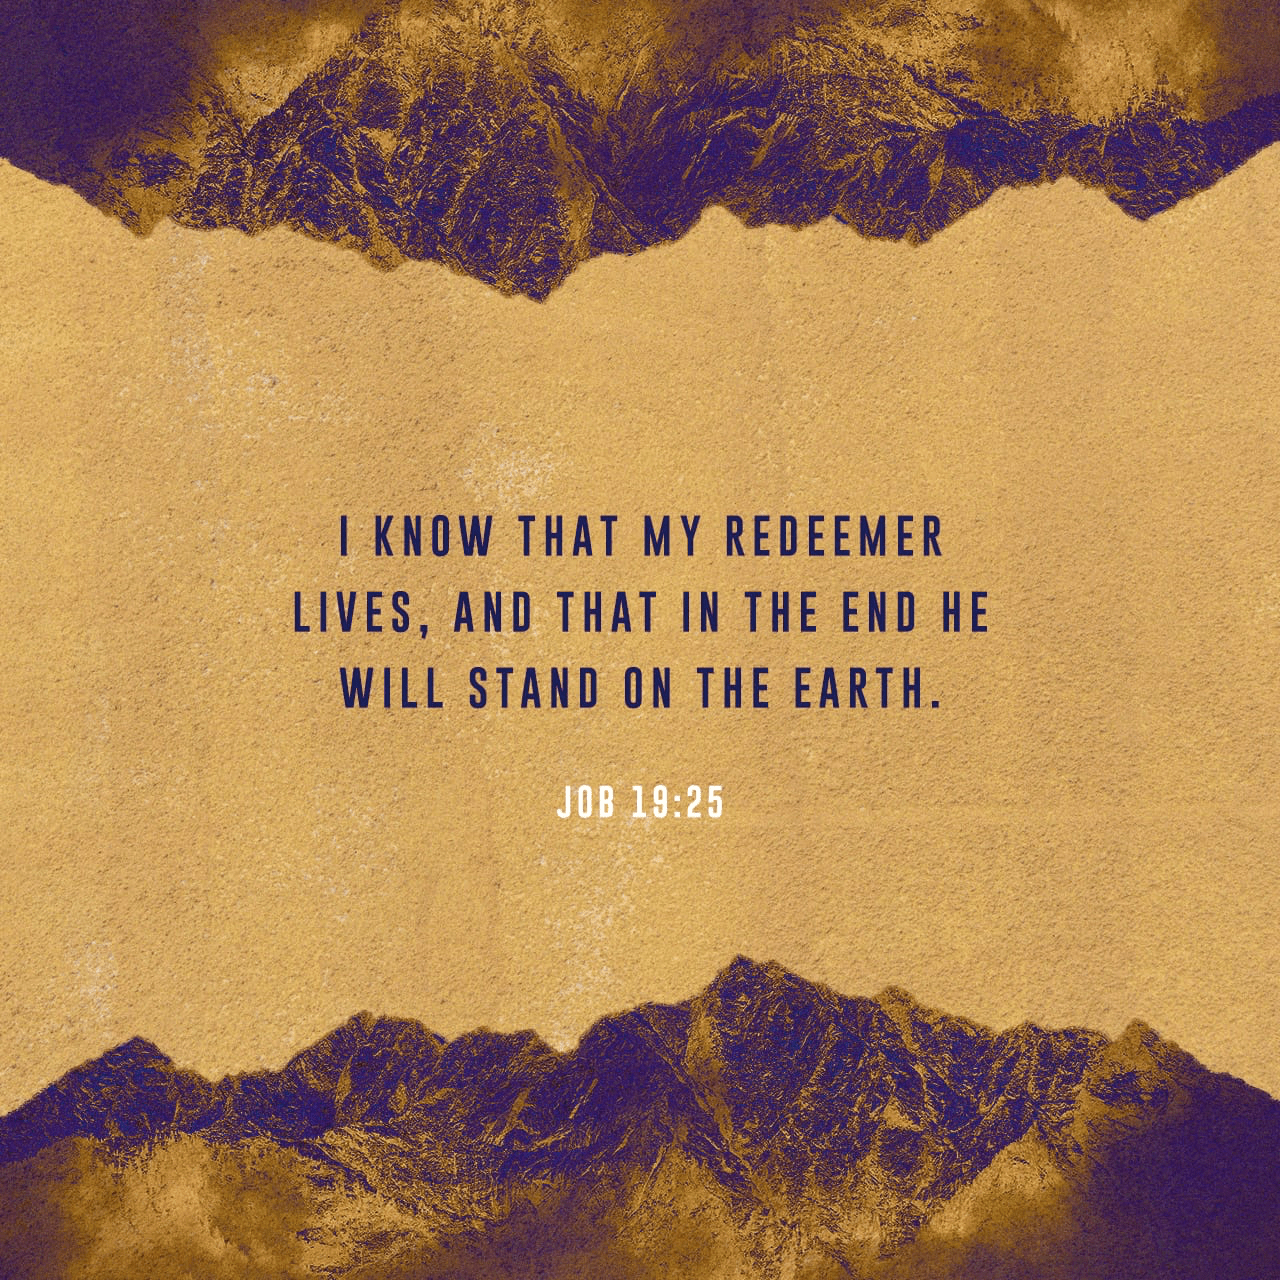 VOTD March 15 - “As for me, I know that my Redeemer lives, And at the last He will take His stand on the earth.” ‭‭Job‬ ‭19:25‬ ‭NASB‬‬